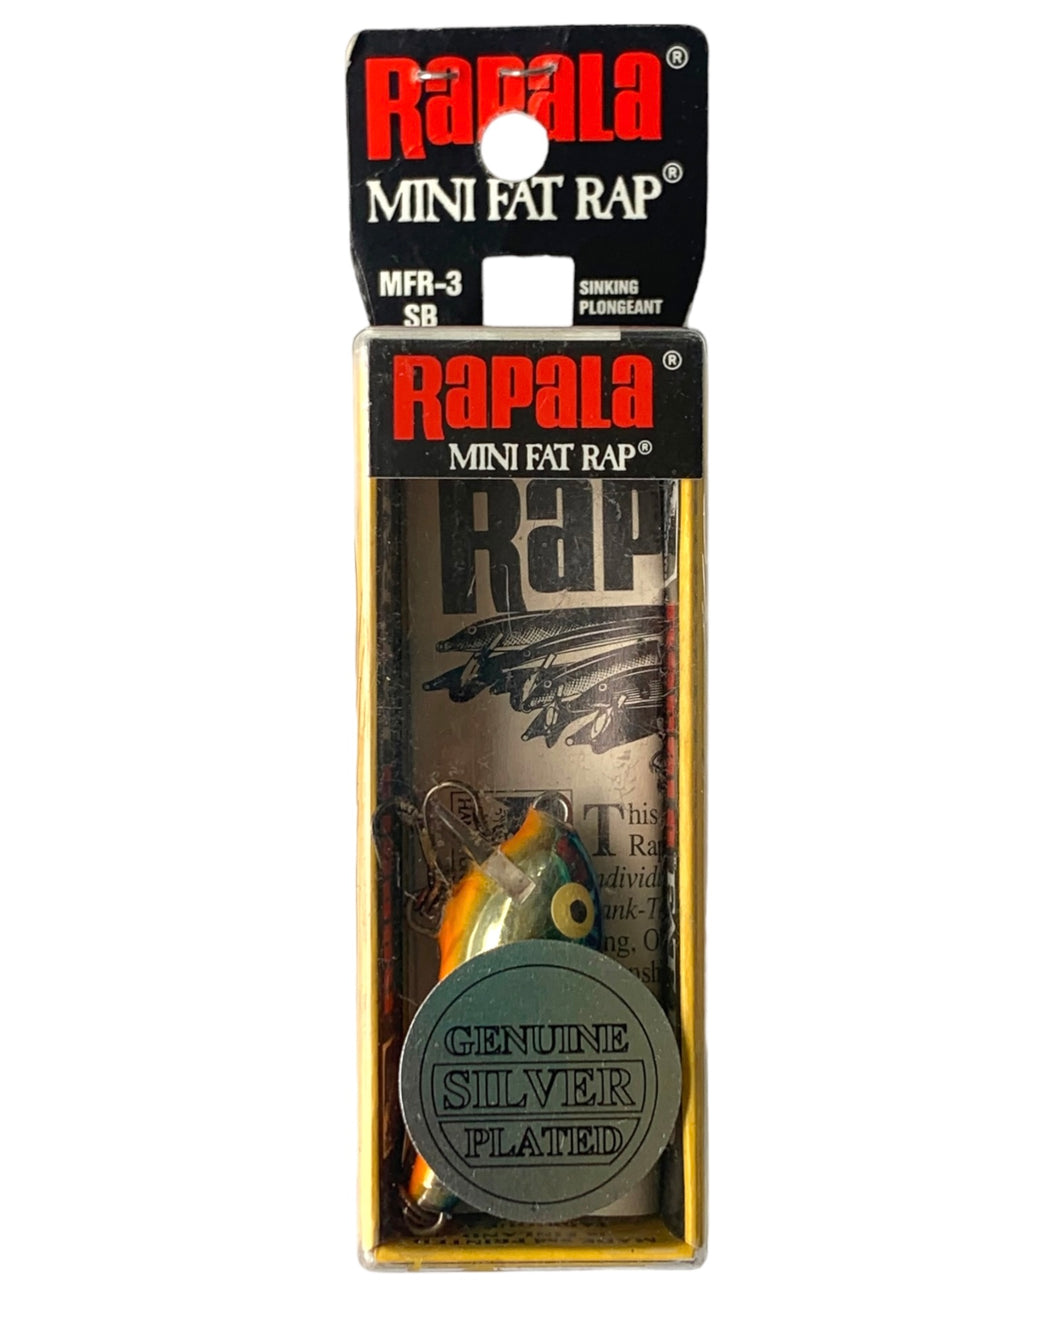 Sealed Box View of  RaPALA Mini Fat Rap MFR-3 B Fishing Lure in SILVER BLUE. Genuine Silver Plated. Buy Online at TOAD TACKLE.